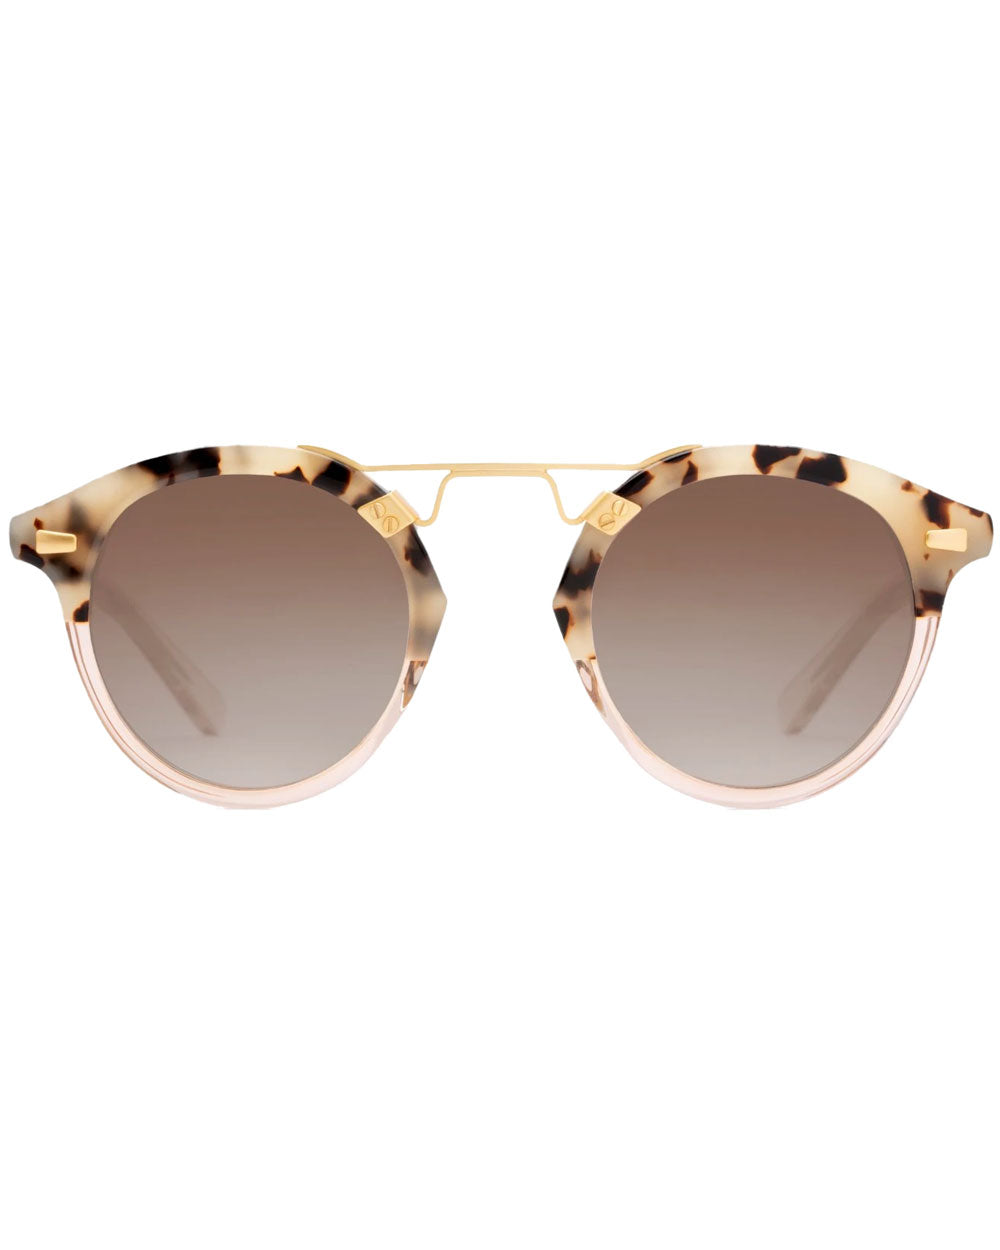 STL II Mirrored Sunglasses in Oyster to Petal 24K